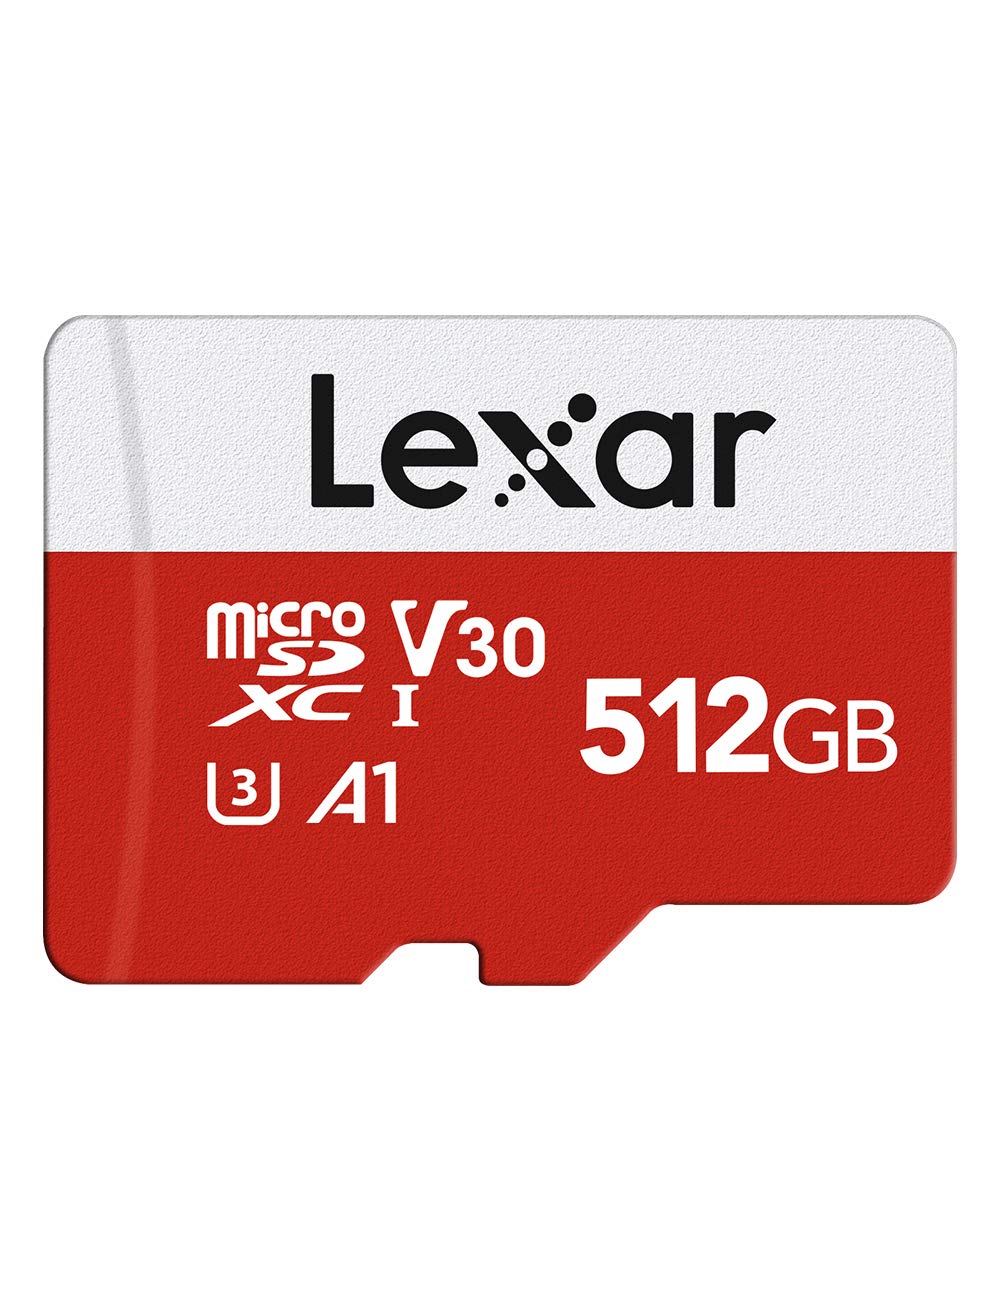 Lexar 512GB Micro SD Card microSDXC UHS-I Flash Memory Card with Adapter - Up to 100MBs A1 U3 Class10 V30 High Speed T